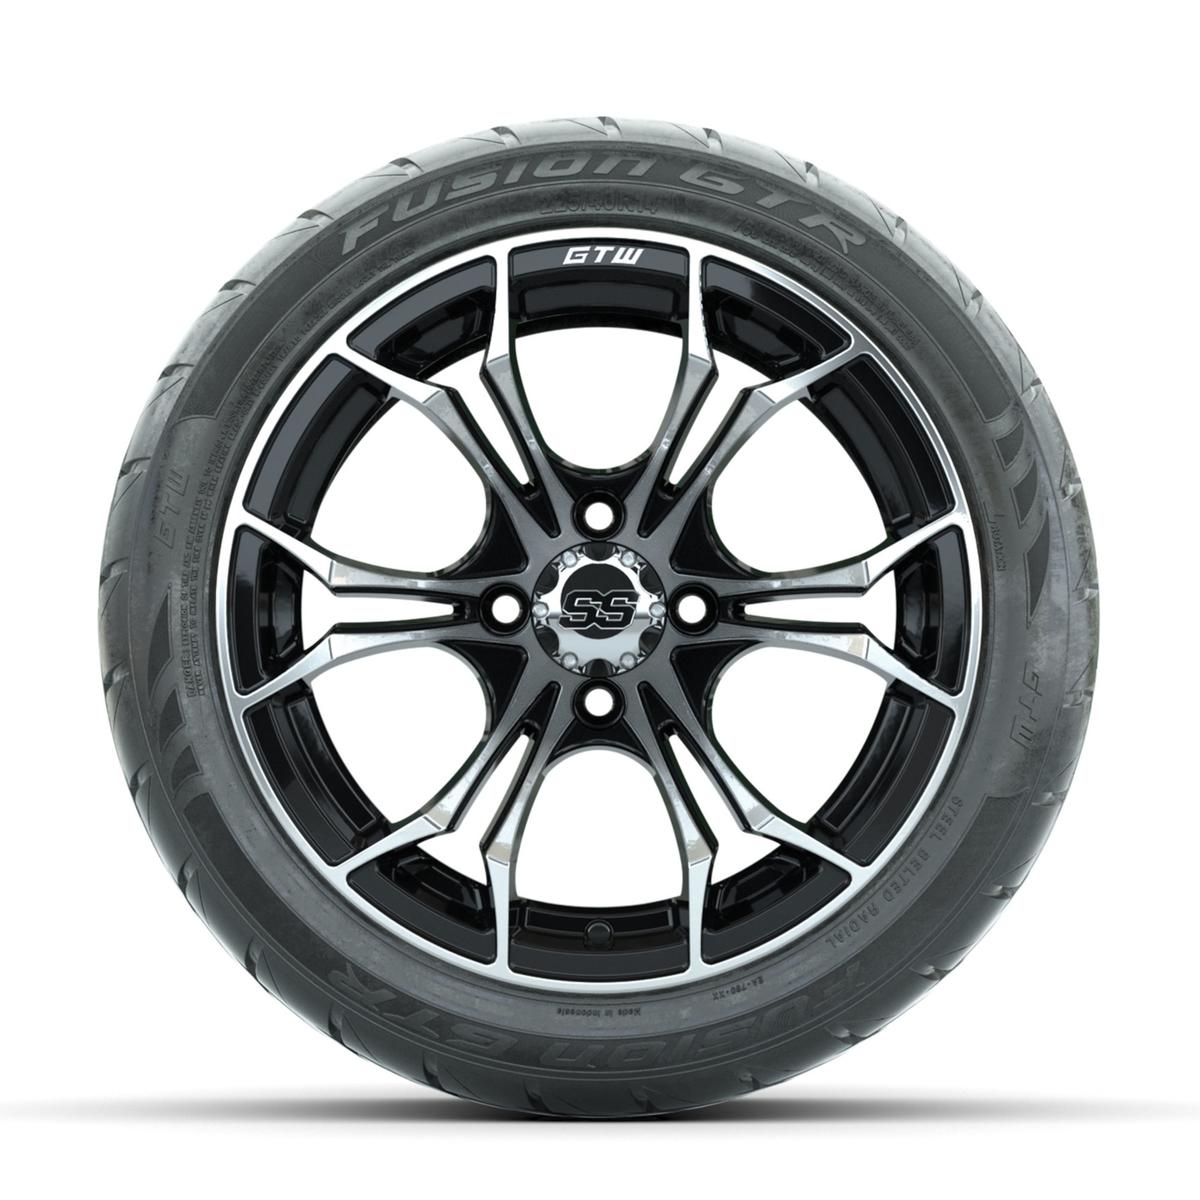 GTW Spyder Machined/Black 14 in Wheels with 225/40-R14 Fusion GTR Street Tires – Full Set